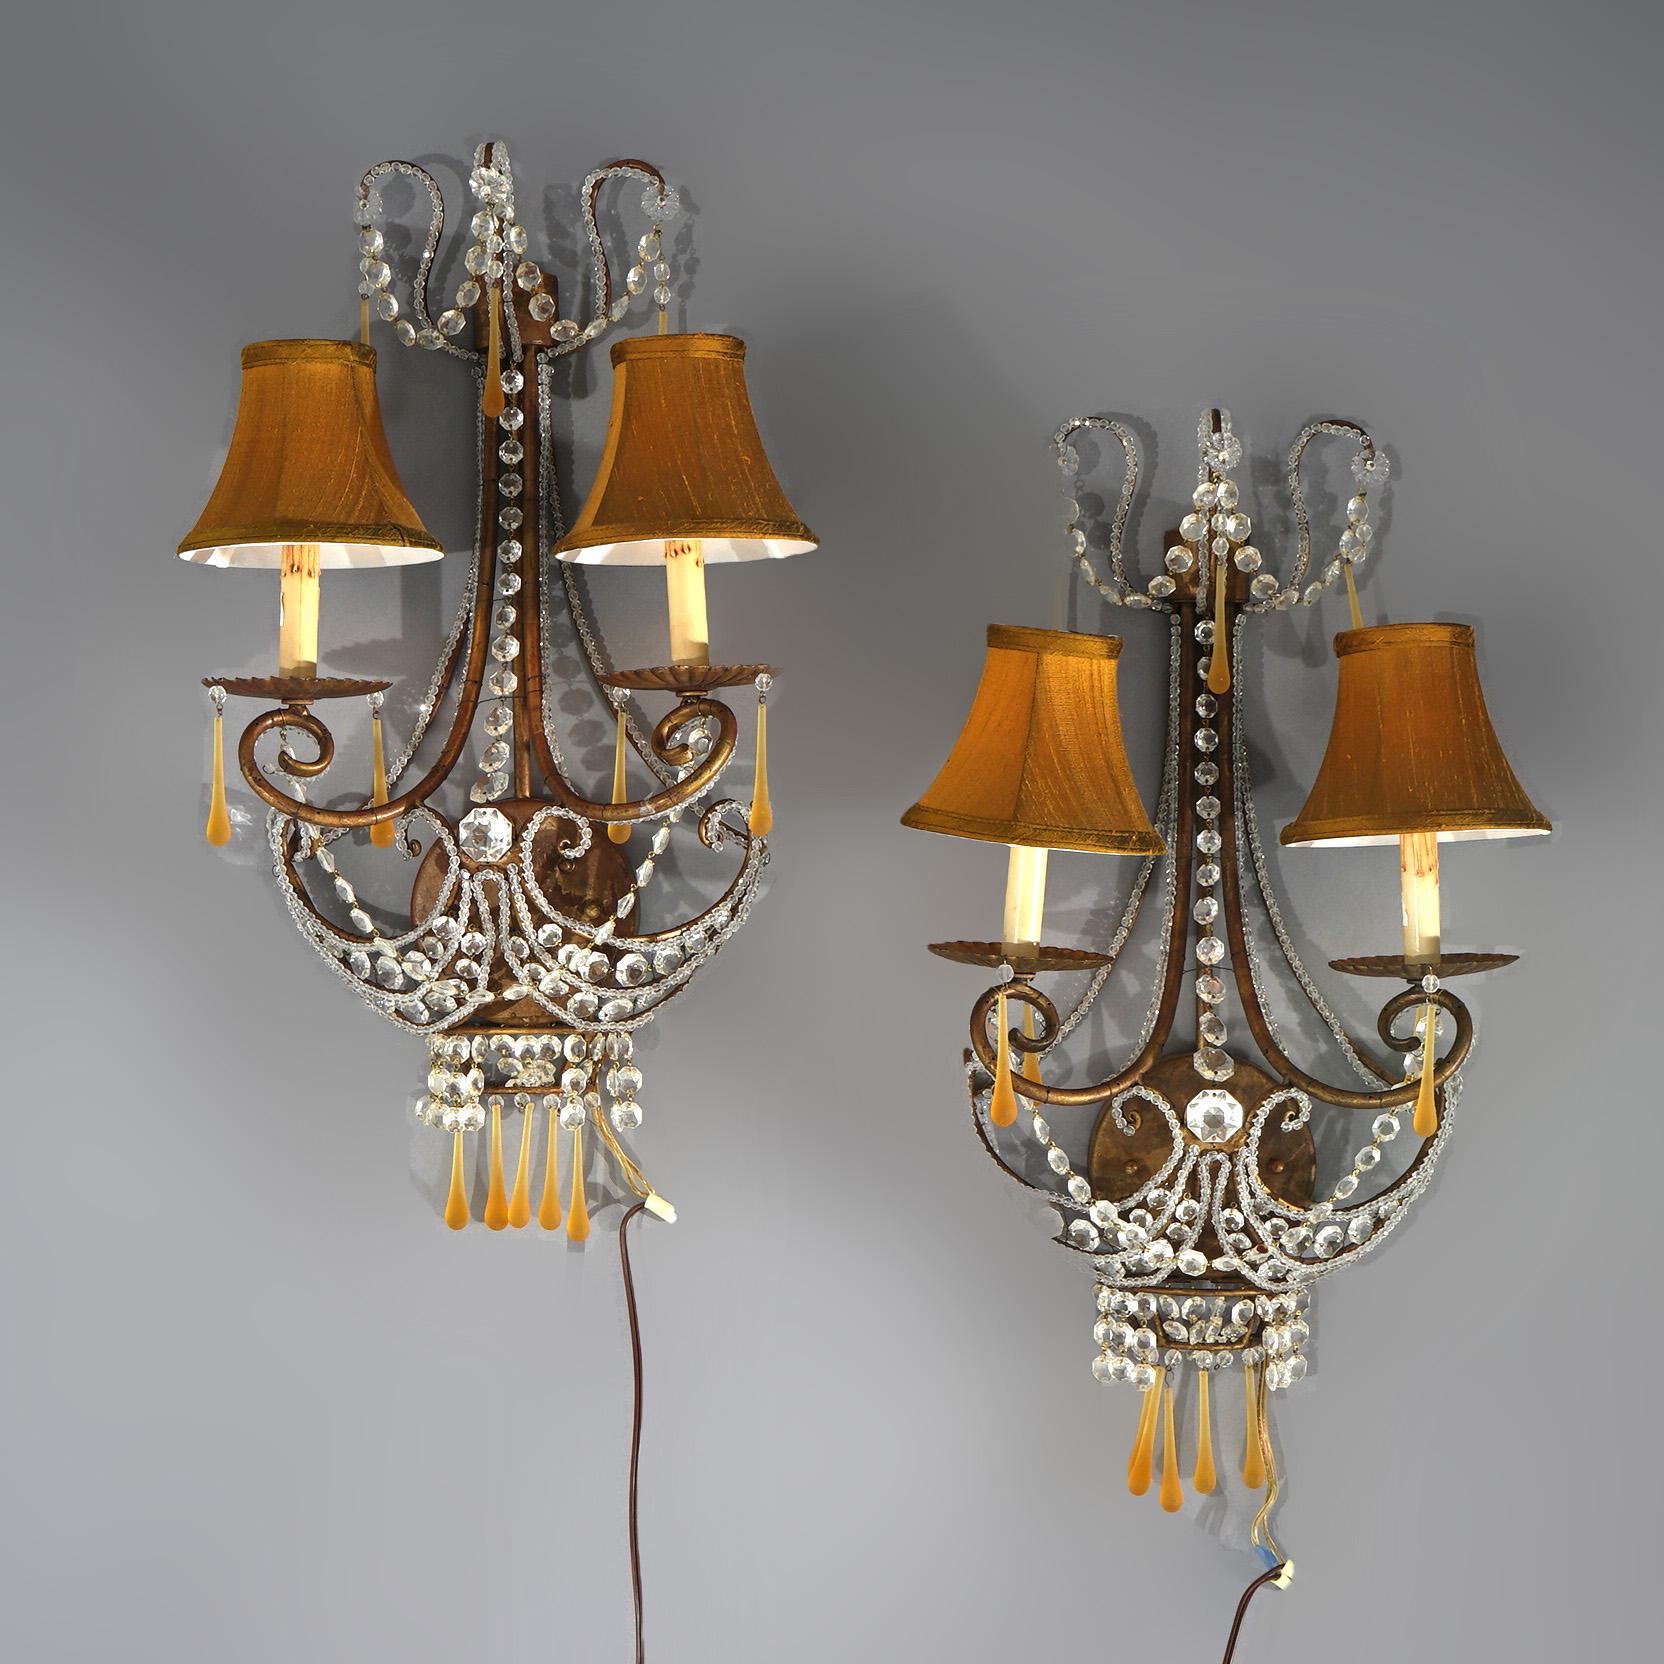 An antique set of French Louis XIV style wall sconces offer scrolled metal frames with two arms terminating in candle lights and crystals throughout, 9thC

Measures - 26